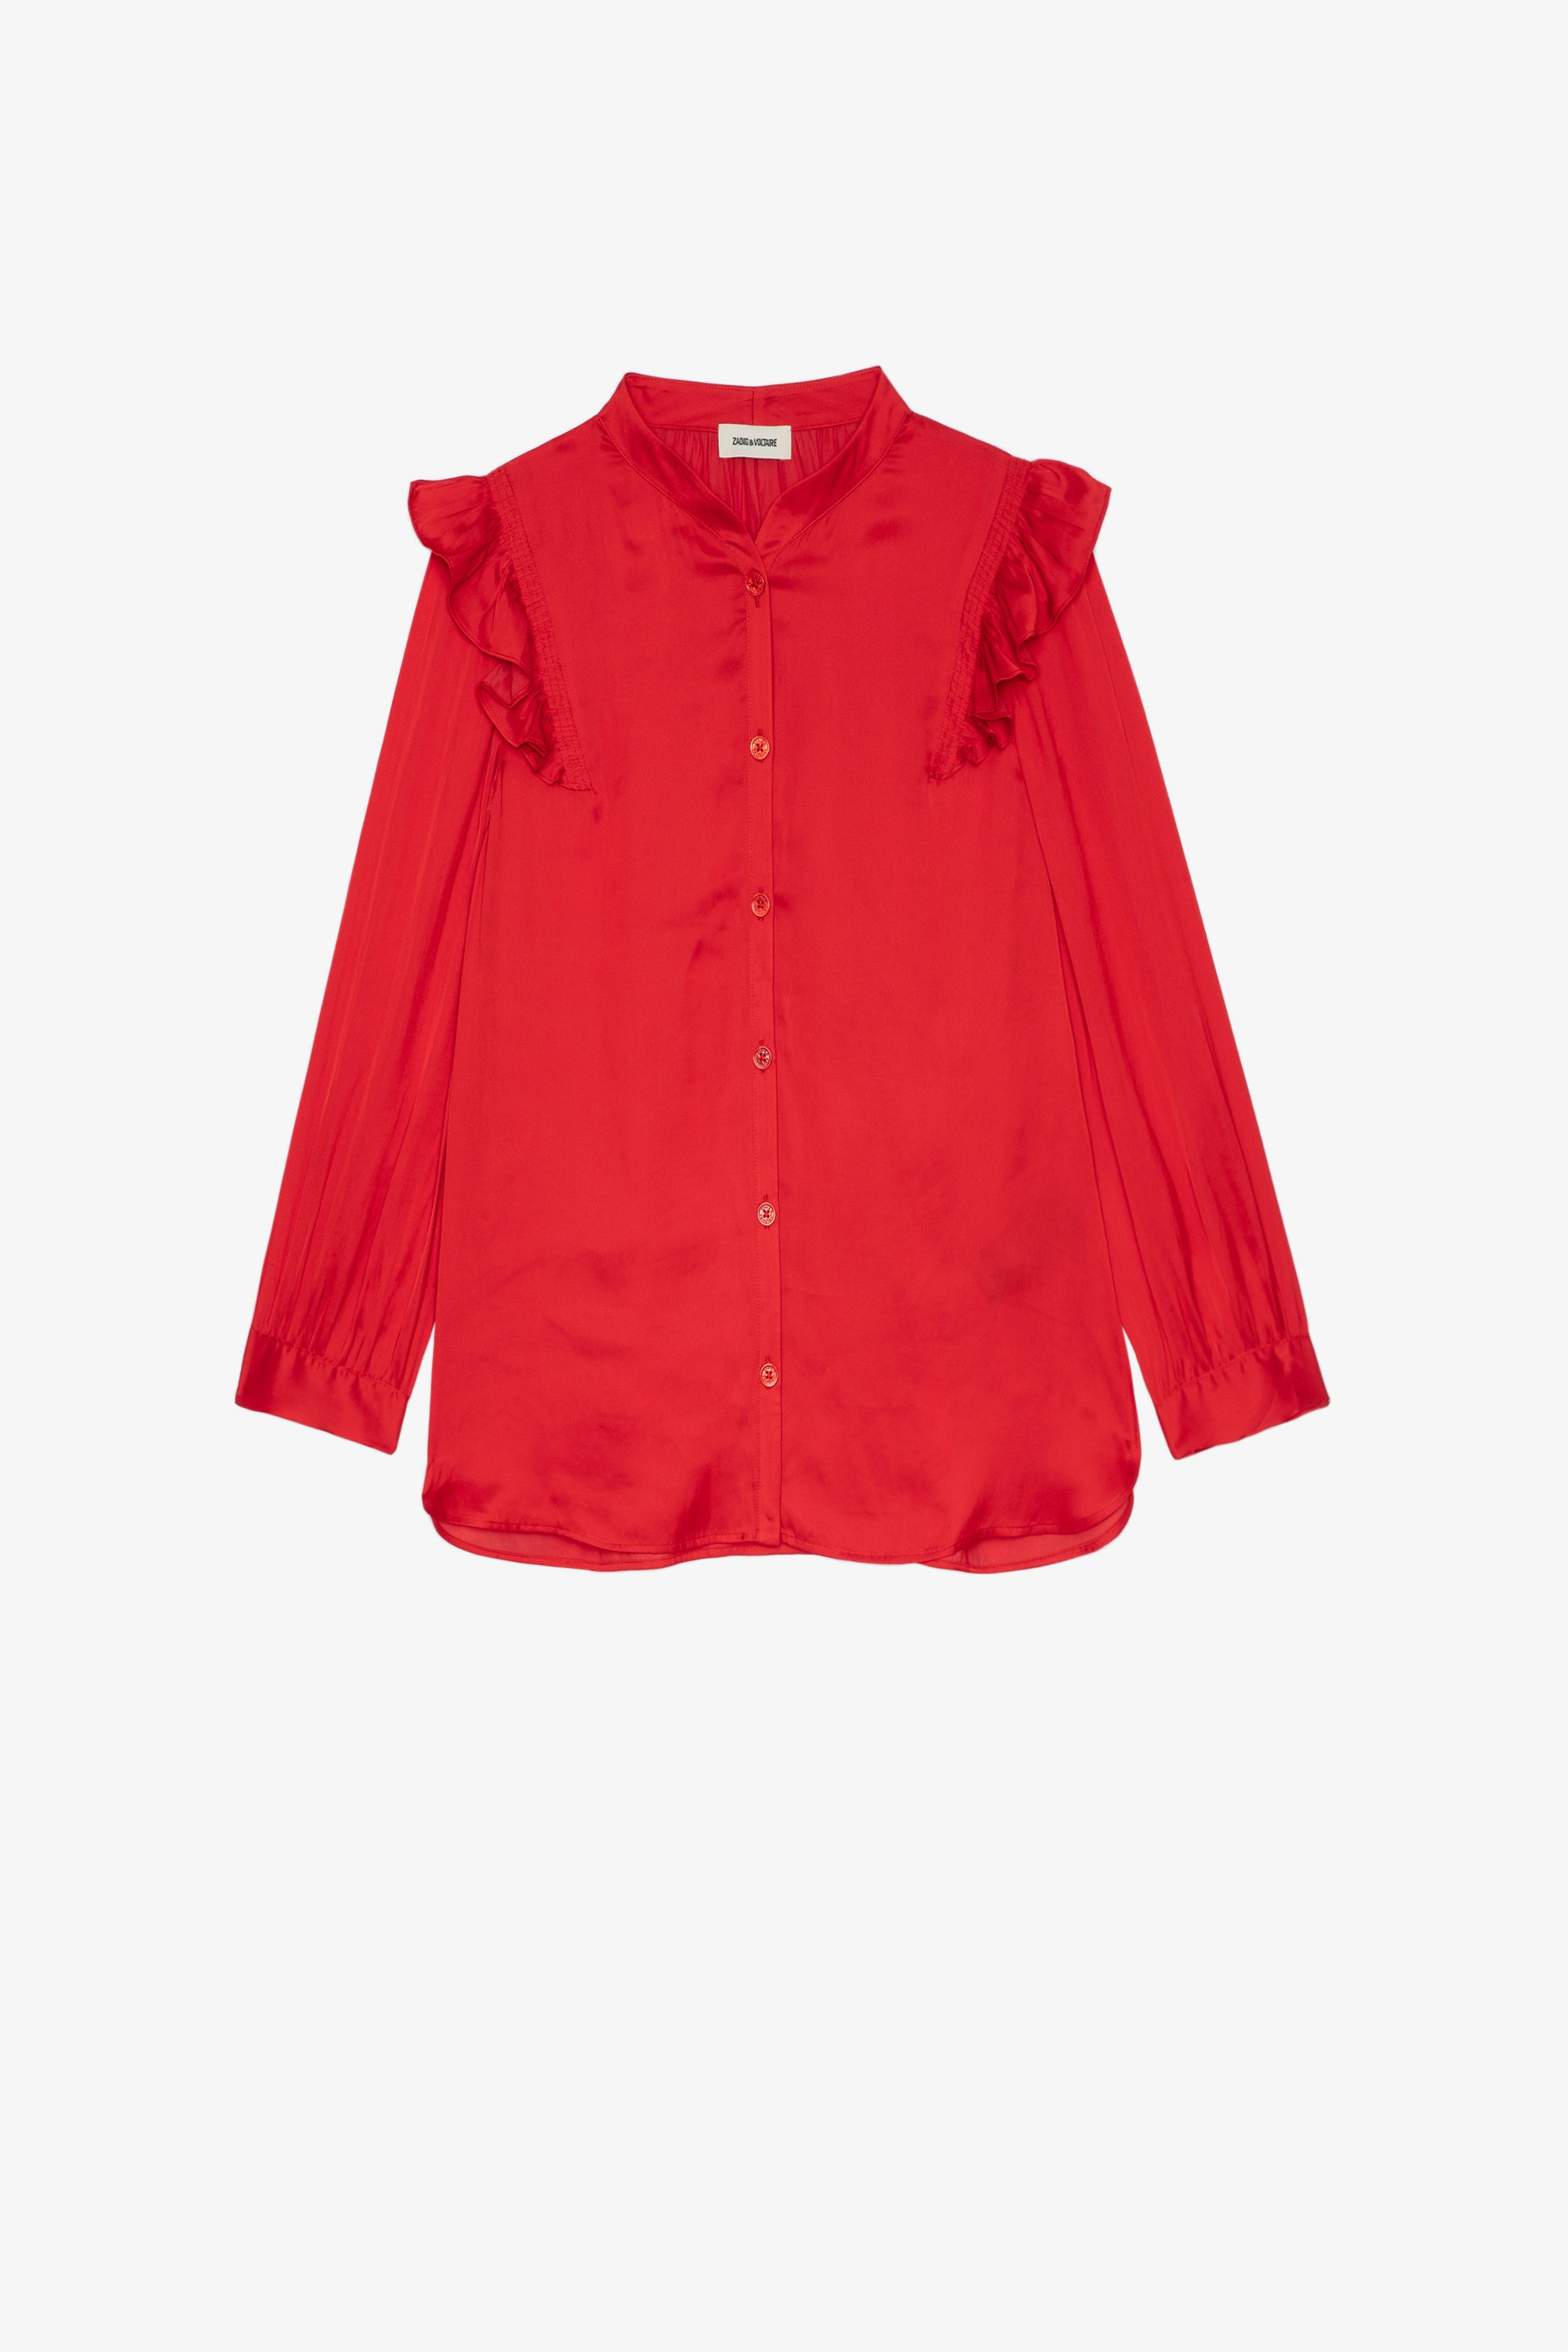 Tygg Satin Shirt Women’s red satiny shirt with long sleeves and ruffle details